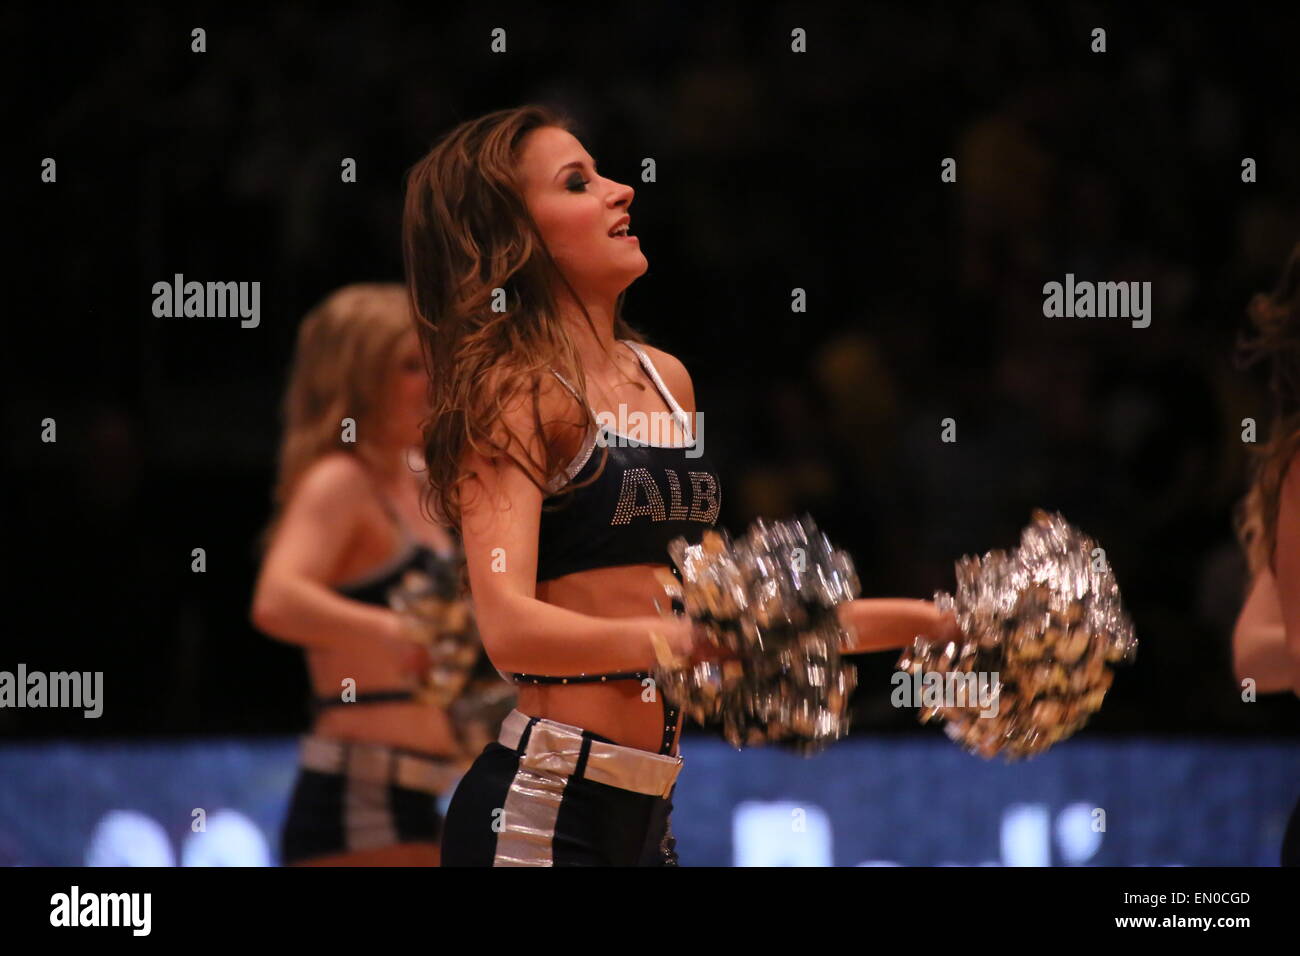 Berlin, Germany. 24th Apr, 2015. Dancer of Alba Berlin team performs during BBL game Alba Berlin versus Crailsheim Merlins at O2 World. Credit:  Madeleine Lenz/Pacific Press/Alamy Live News Stock Photo